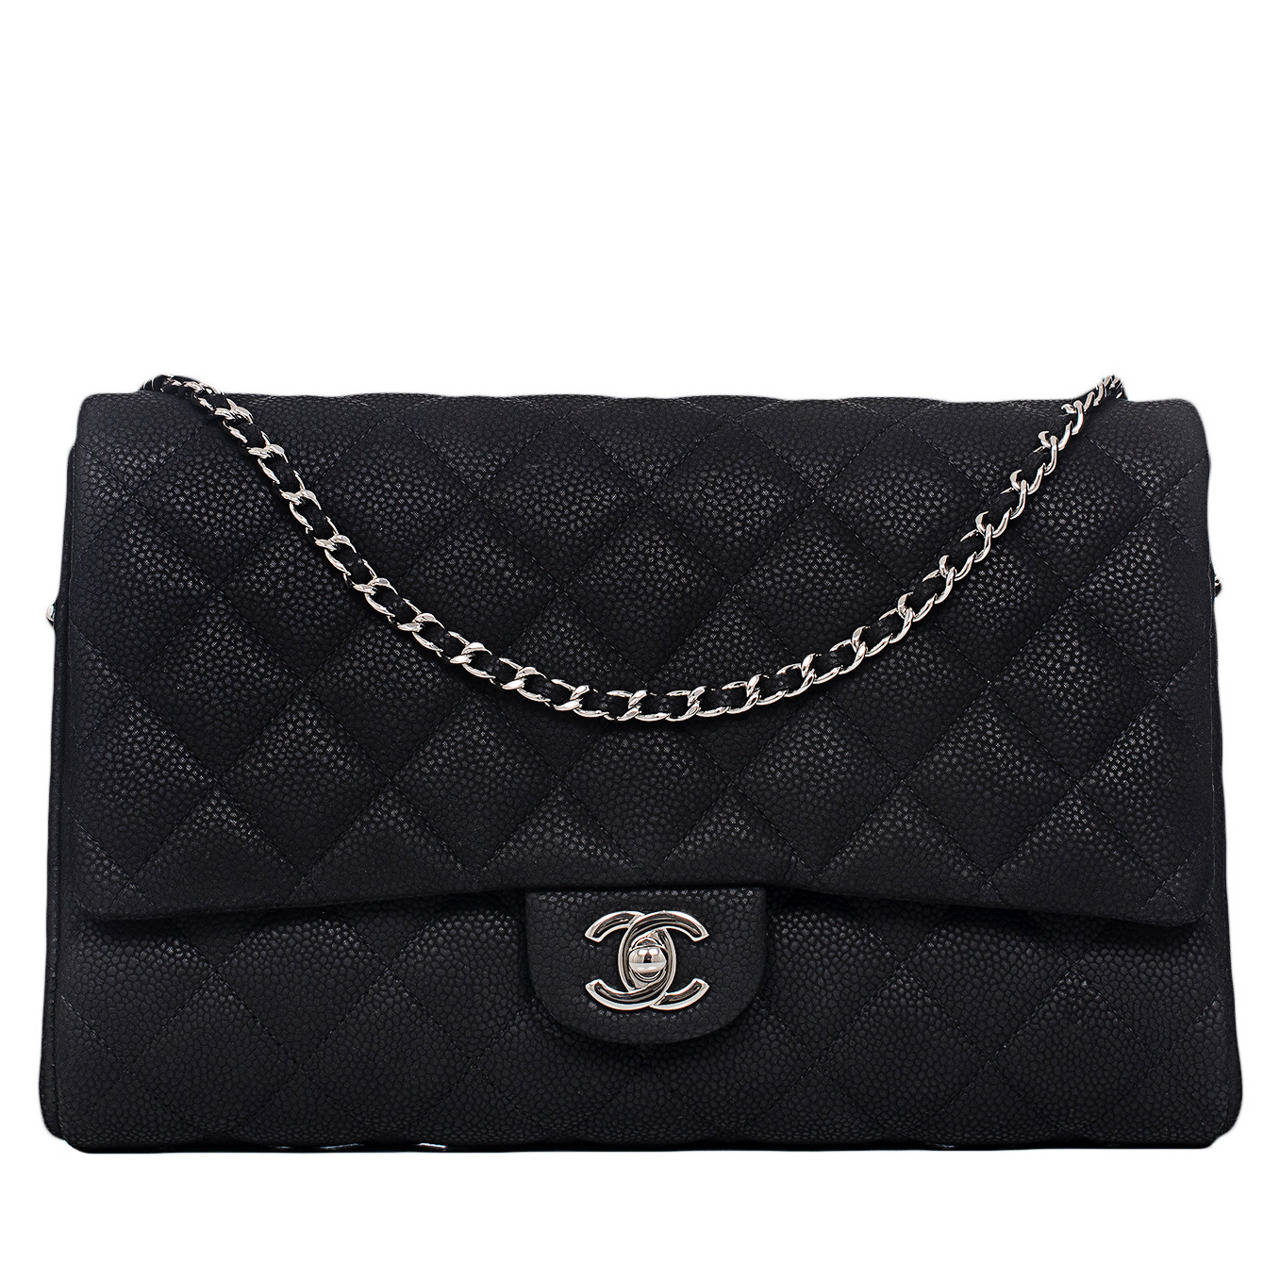 Chanel Black Quilted Matte Caviar New Clutch With Chain